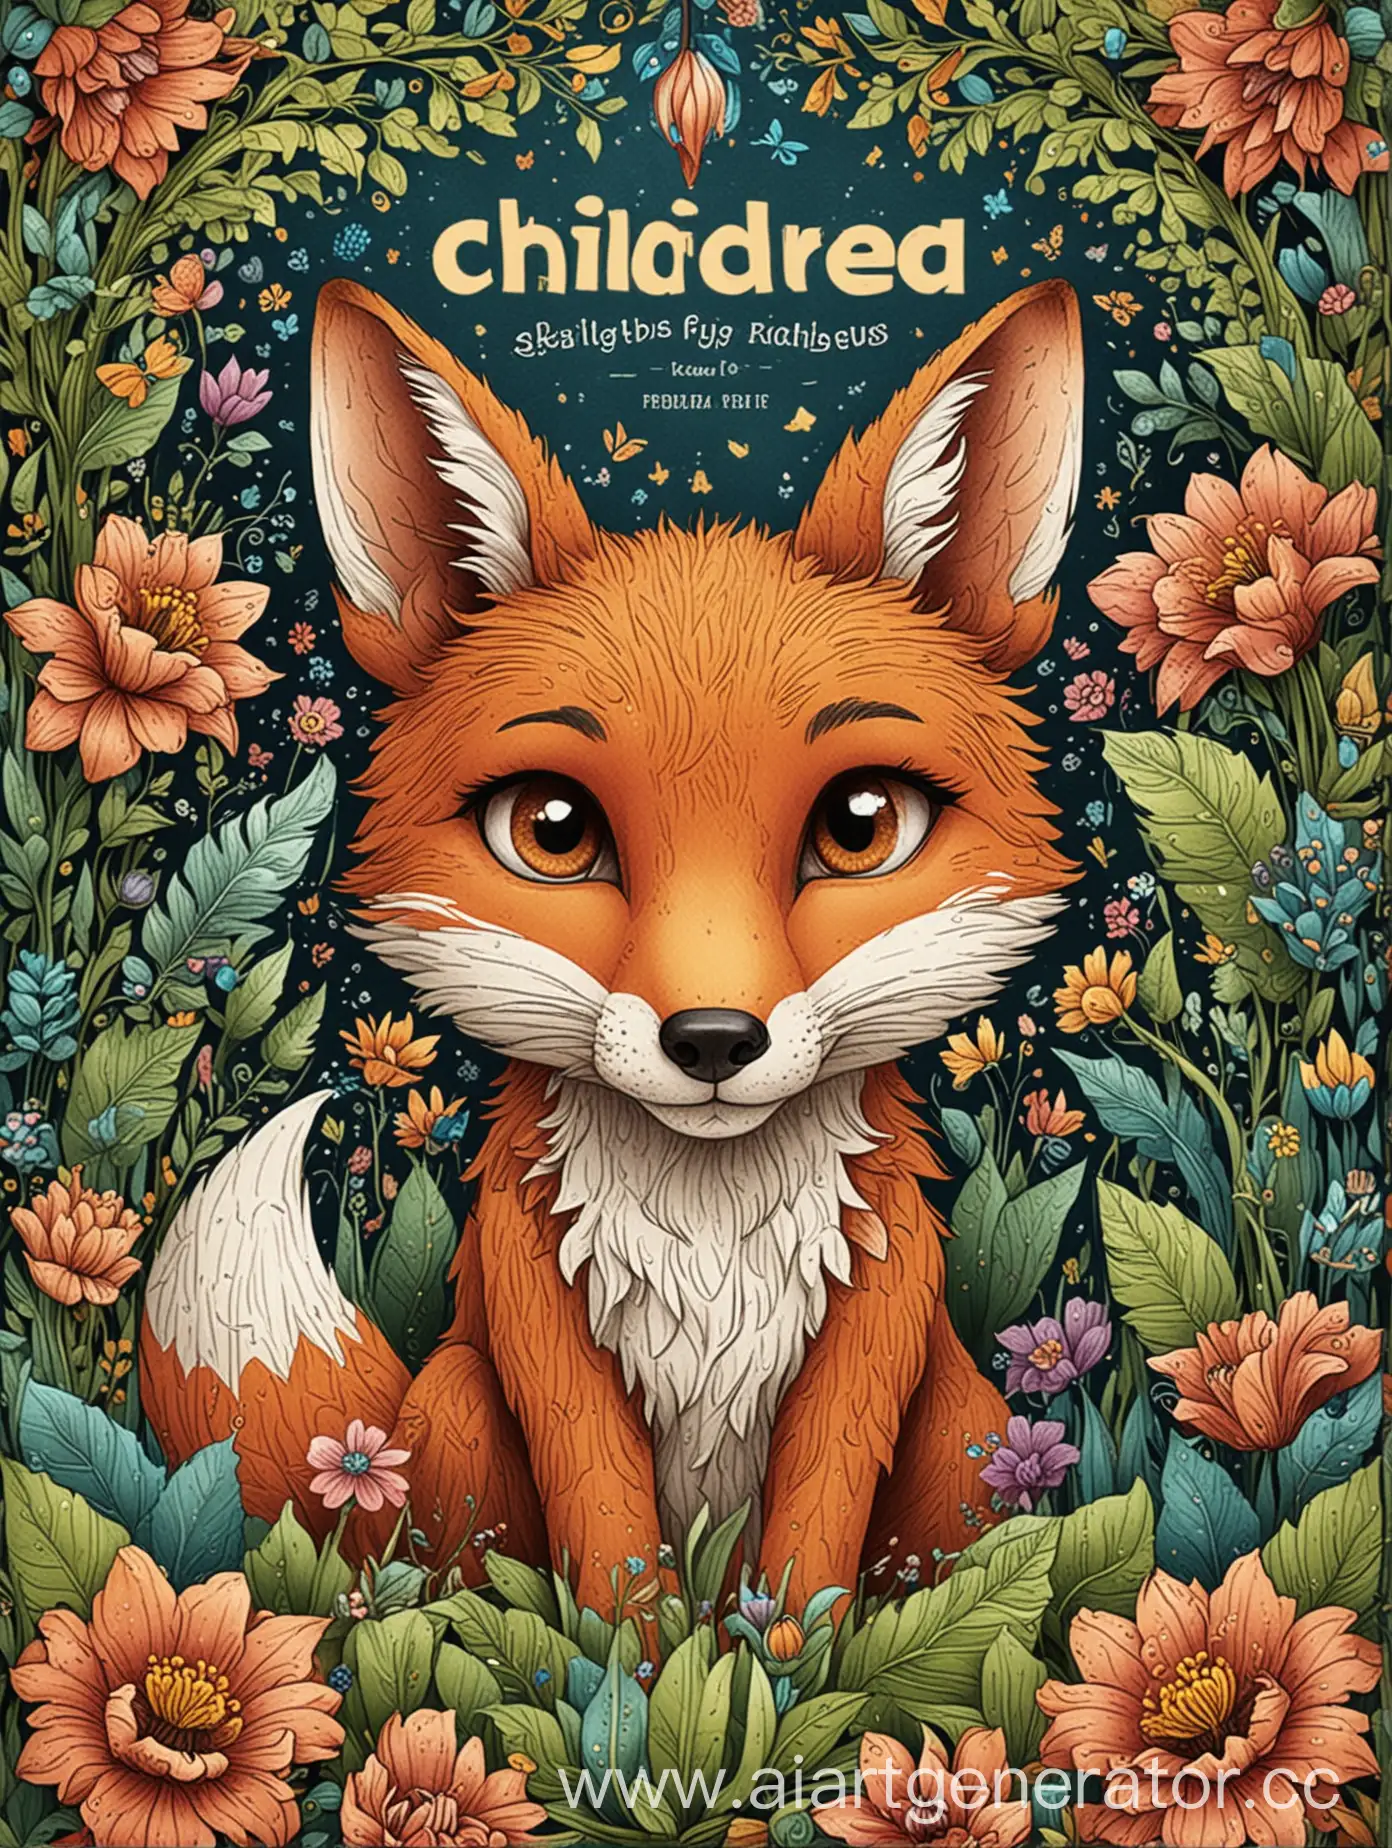 Create a coloring book cover for children. In the center of the cover should be an image of a little fox with big eyes and a playful facial expression. Around the fox, there should be intricate patterns and elements suitable for coloring, such as flowers, trees, butterflies, and rainbows. The background of the cover should be minimalist. The title of the book "Coloring Book for Children" should be written in large and attractive font at the top of the cover.